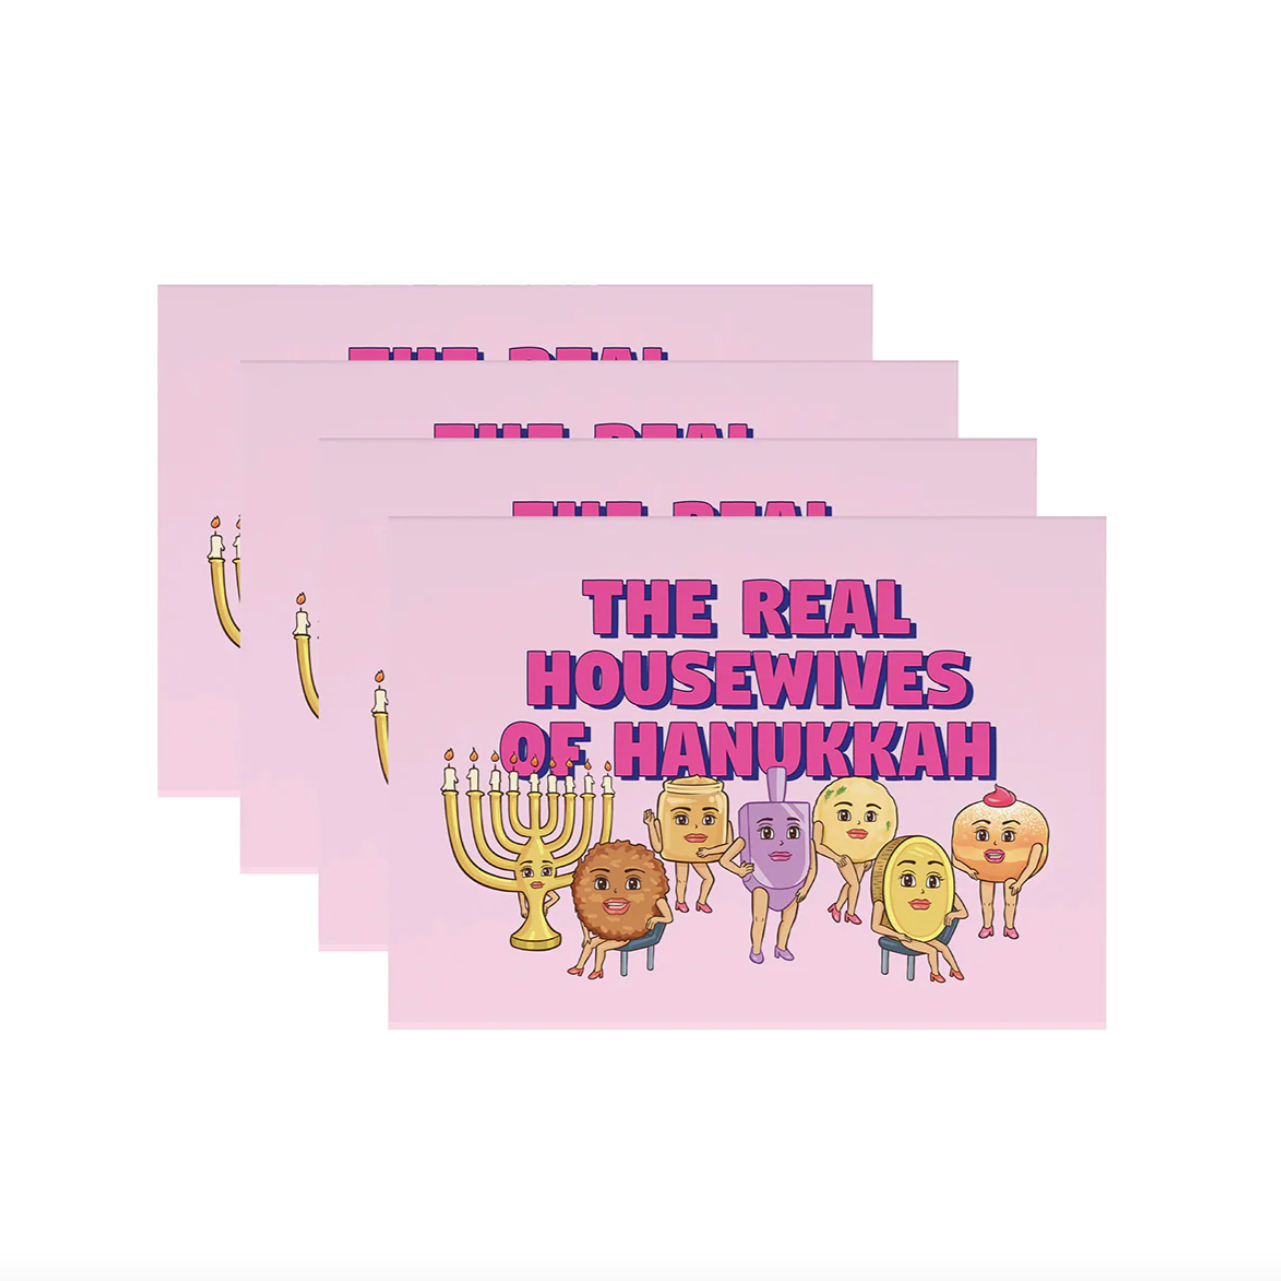 Menschions Cards Real Housewives Of Hanukkah Cards - Box of 4